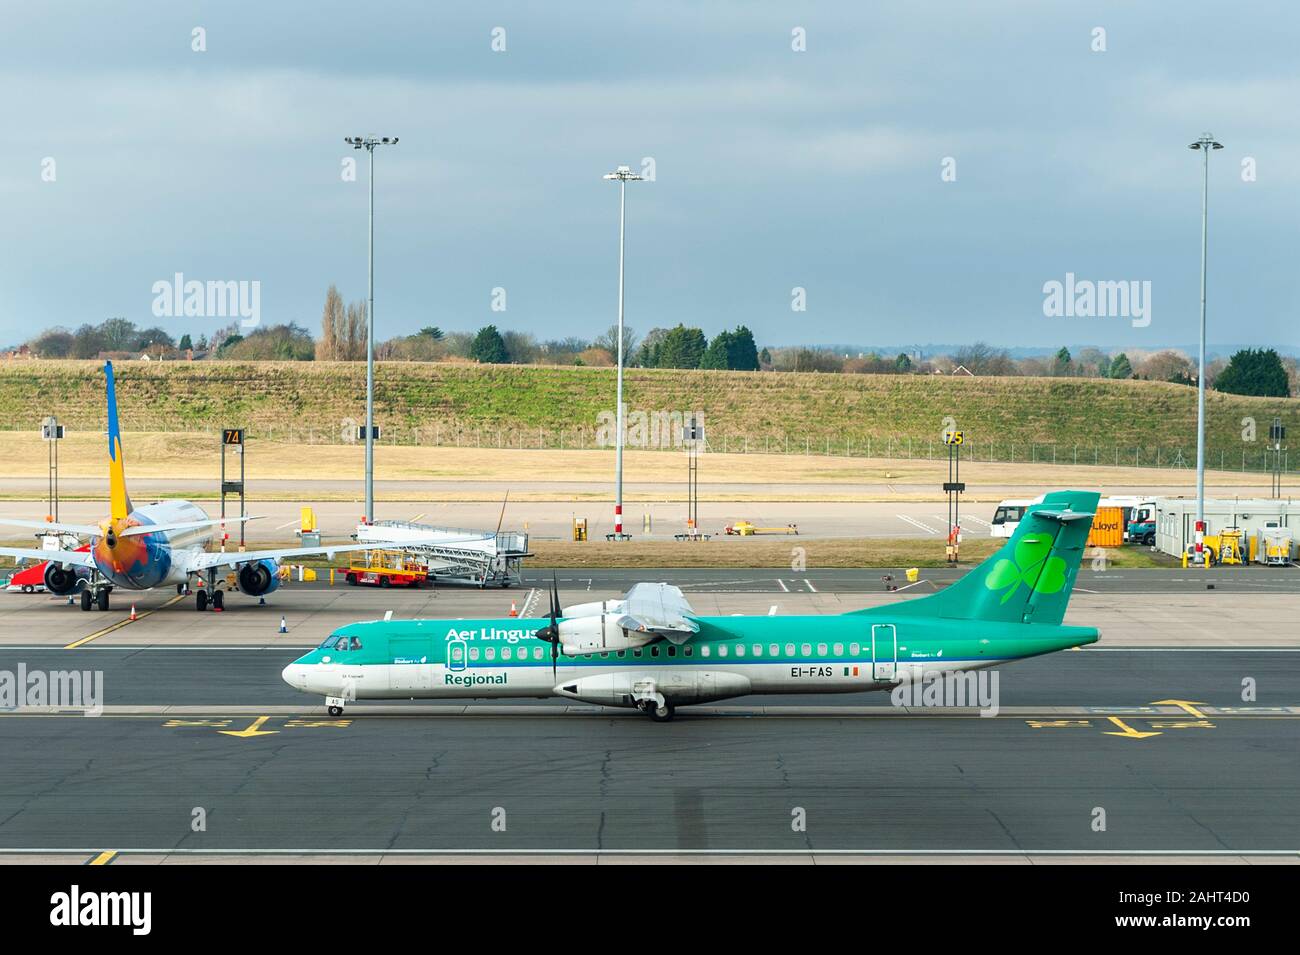 Aer Lingus Atr 72-600 aircraft EI-FAS taxis before take off from Birmingham Airport (BHX), UK to Cork (ORK), Ireland. Stock Photo